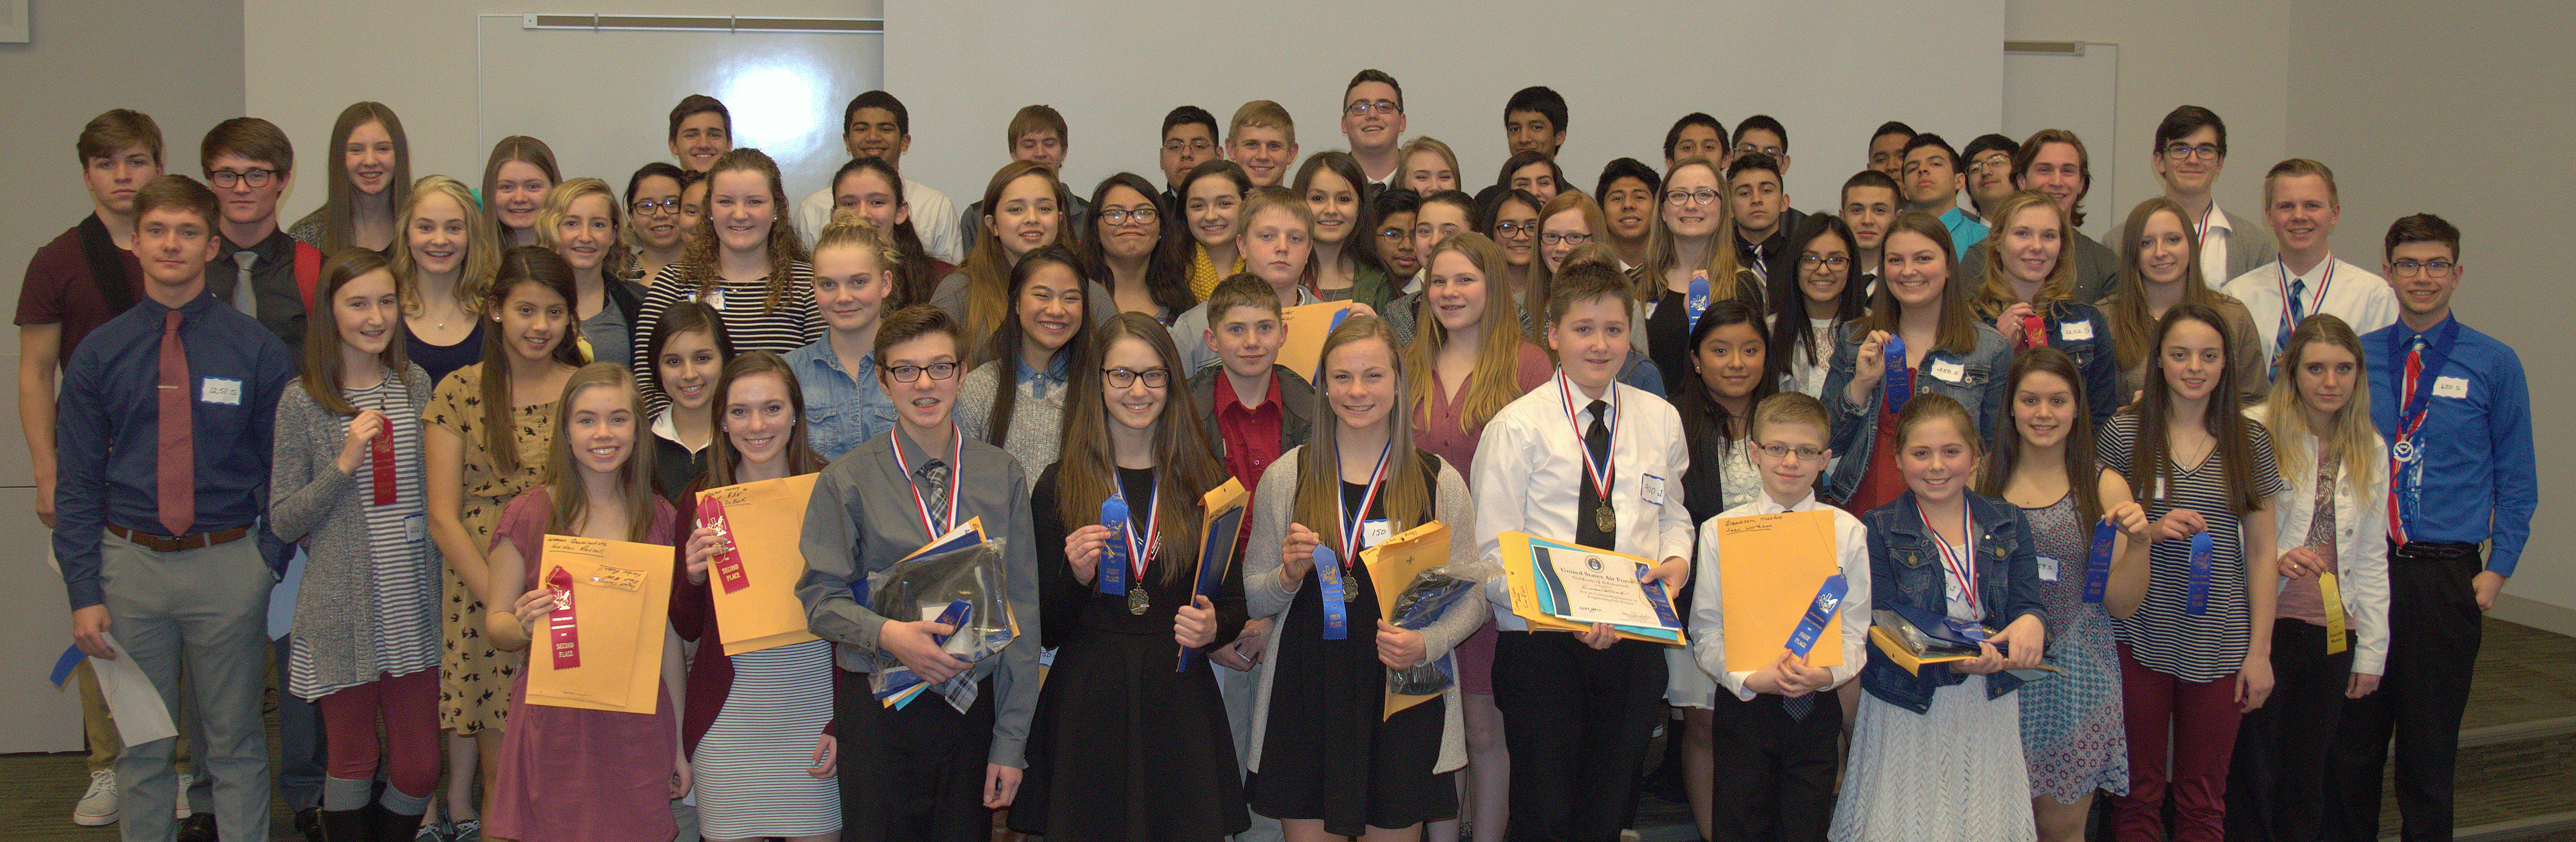 Junior and senior high students competed at the 2017 Science and Engineering fair at NCTA in Curtis.  Registration has tripled this year. (NCTA file photo).